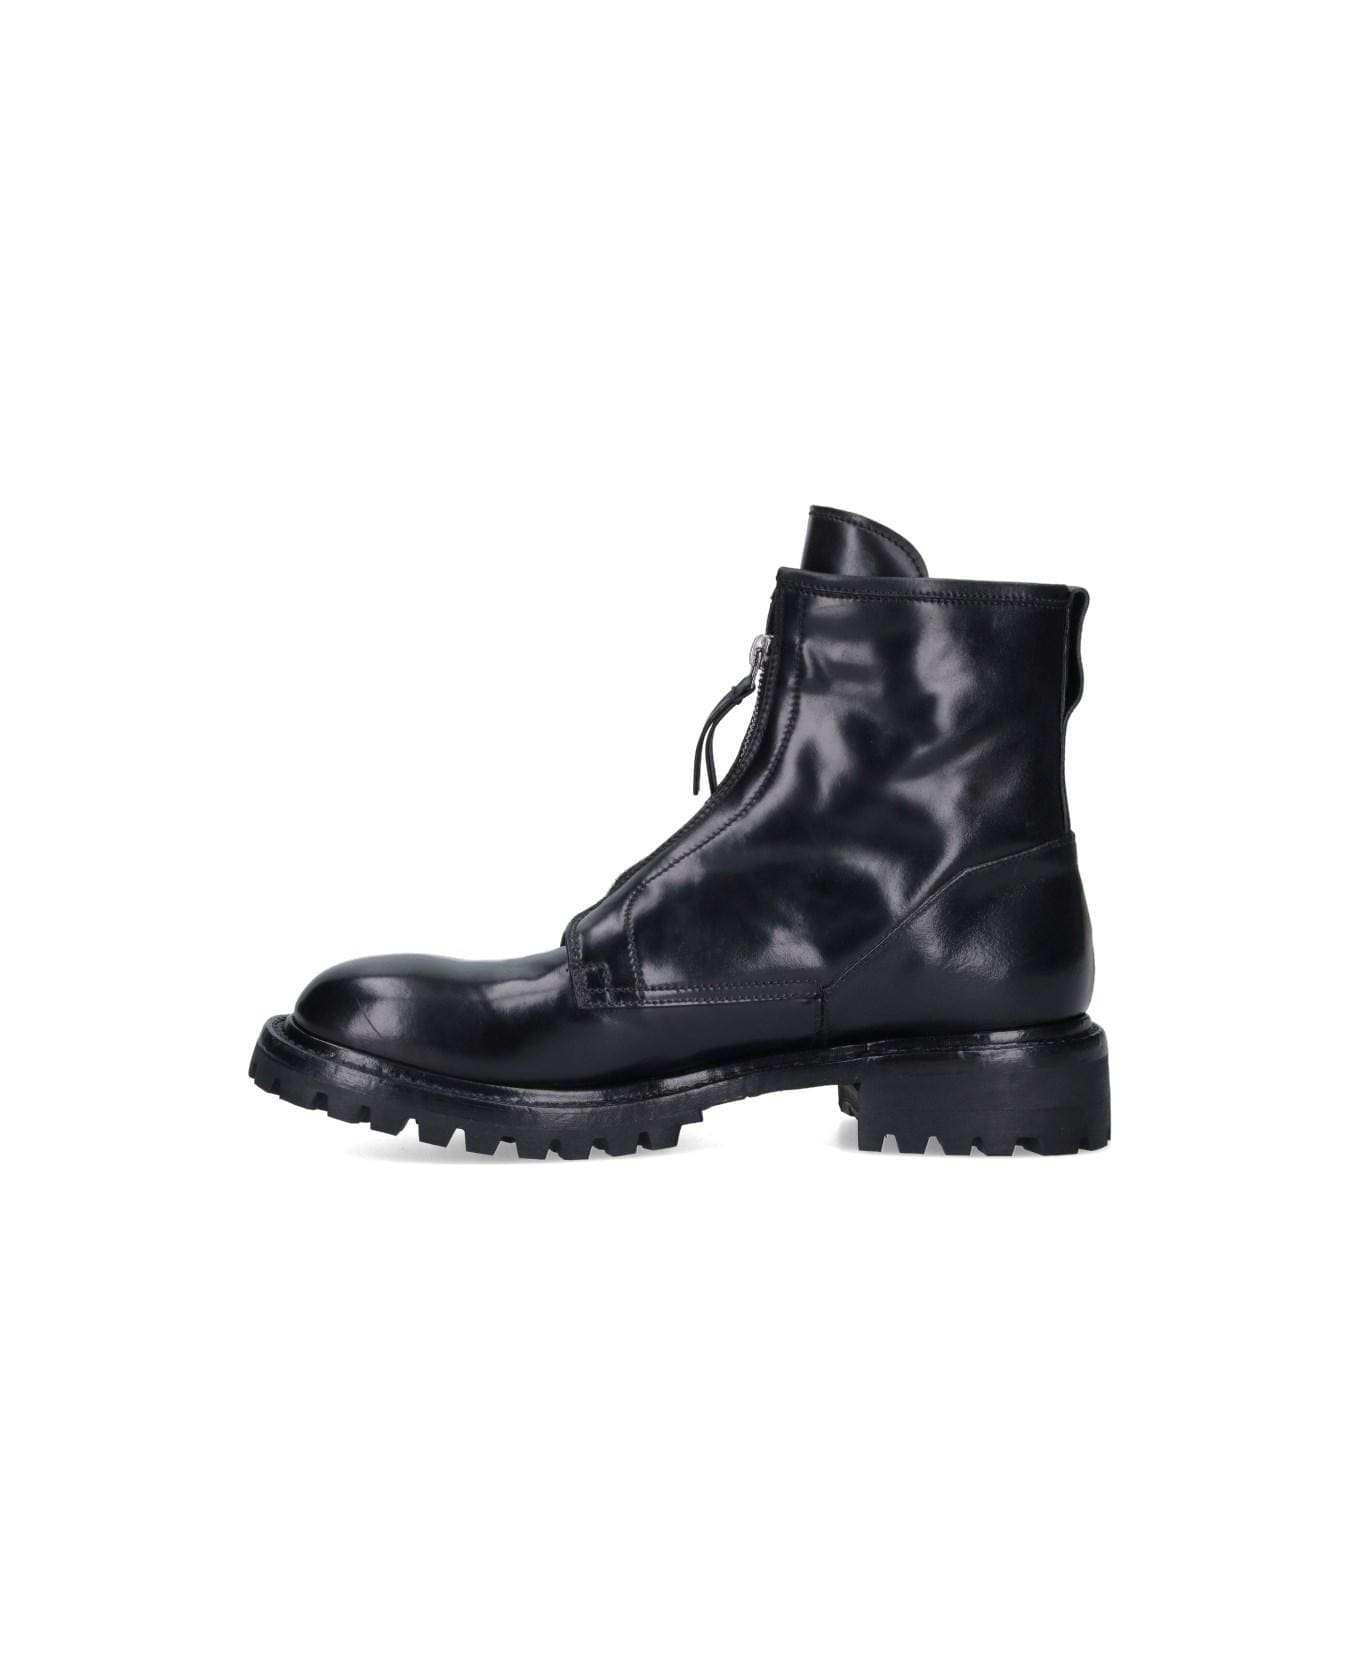 Premiata Leather Ankle Boots Boots - BLACK ブーツ